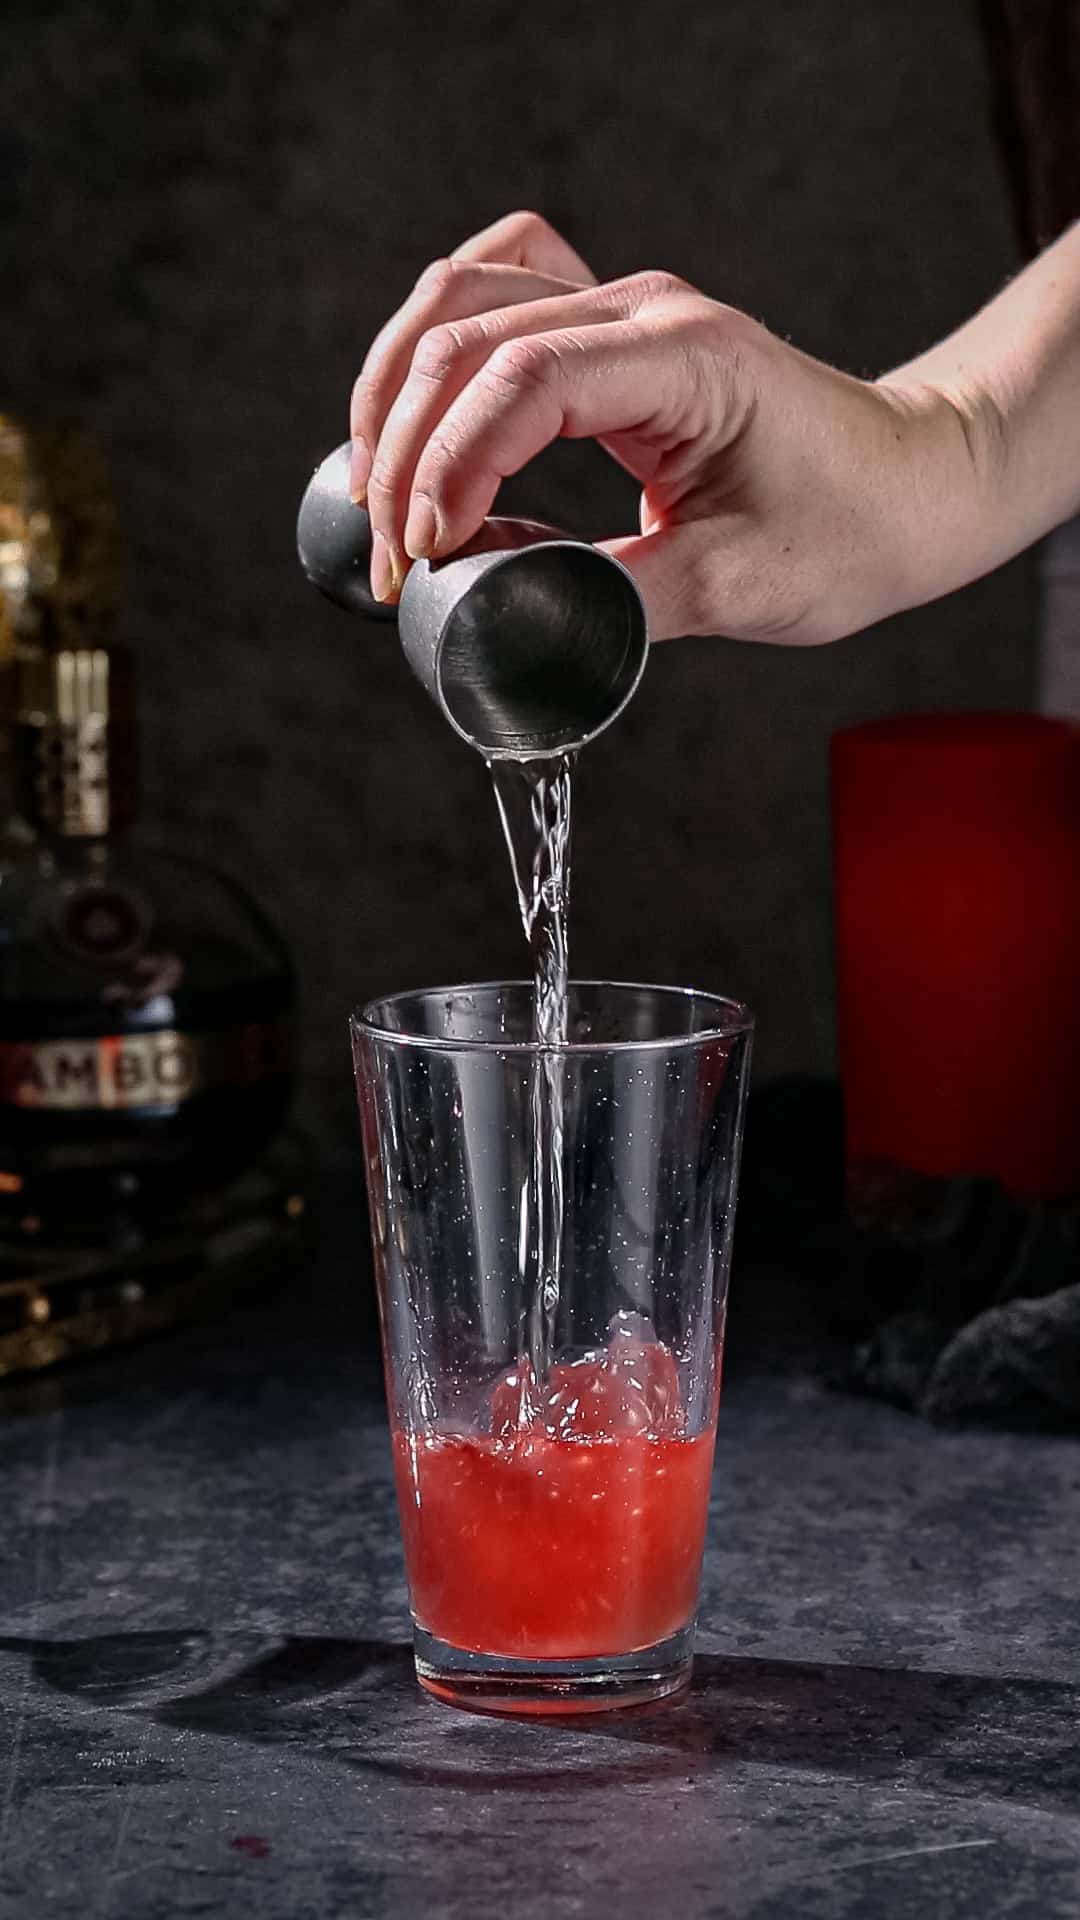 Hand adding vodka from a jigger into a cocktail shaker filled with red liquid.